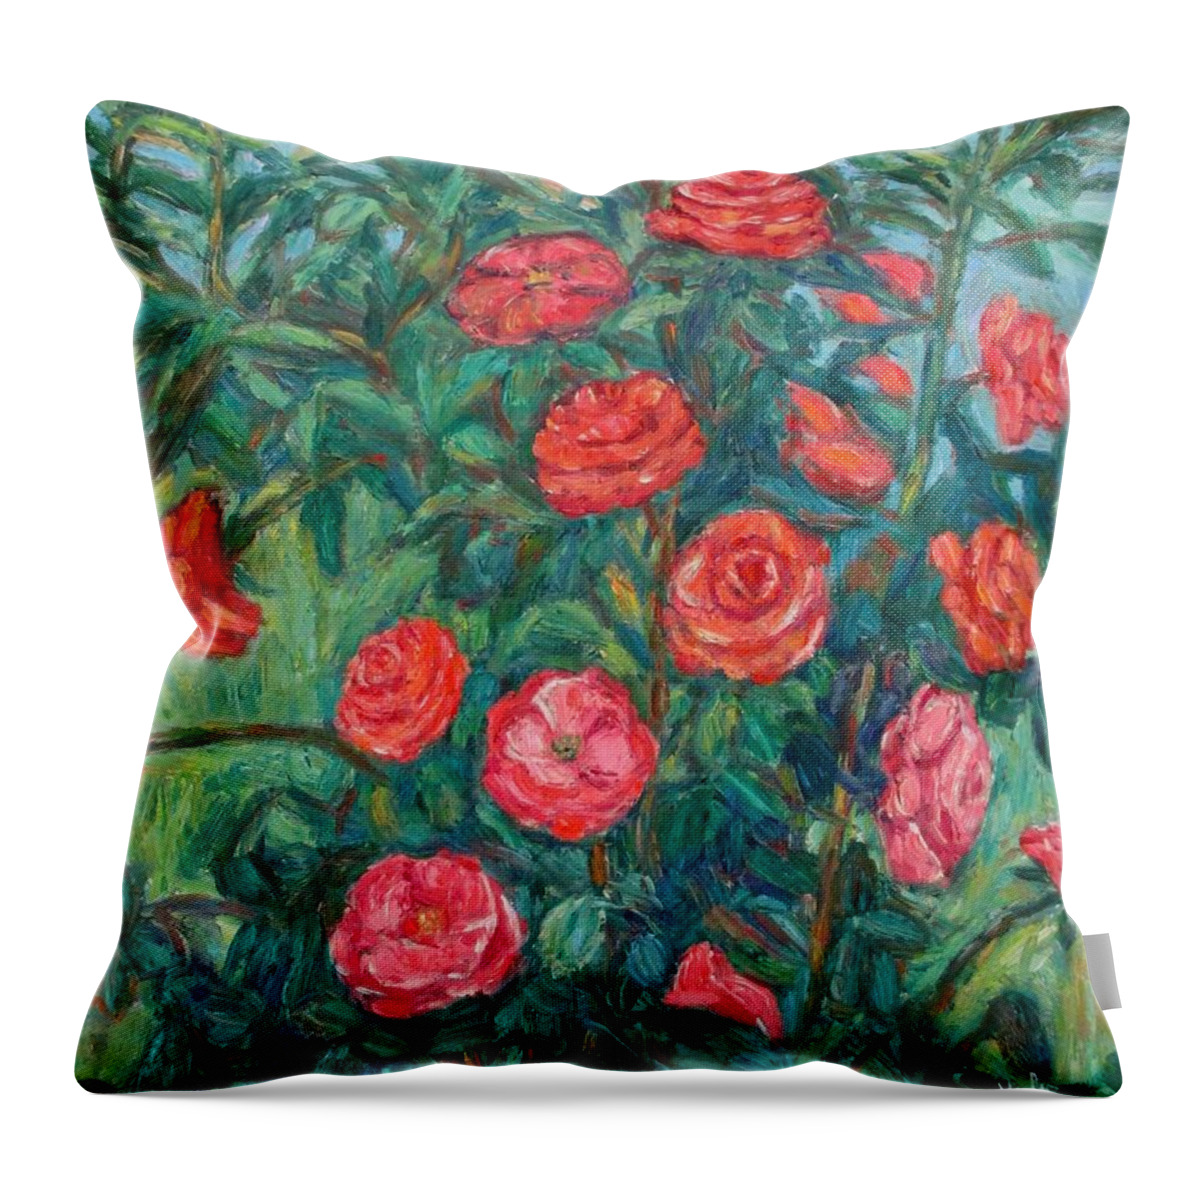 Rose Throw Pillow featuring the painting Spring Roses by Kendall Kessler